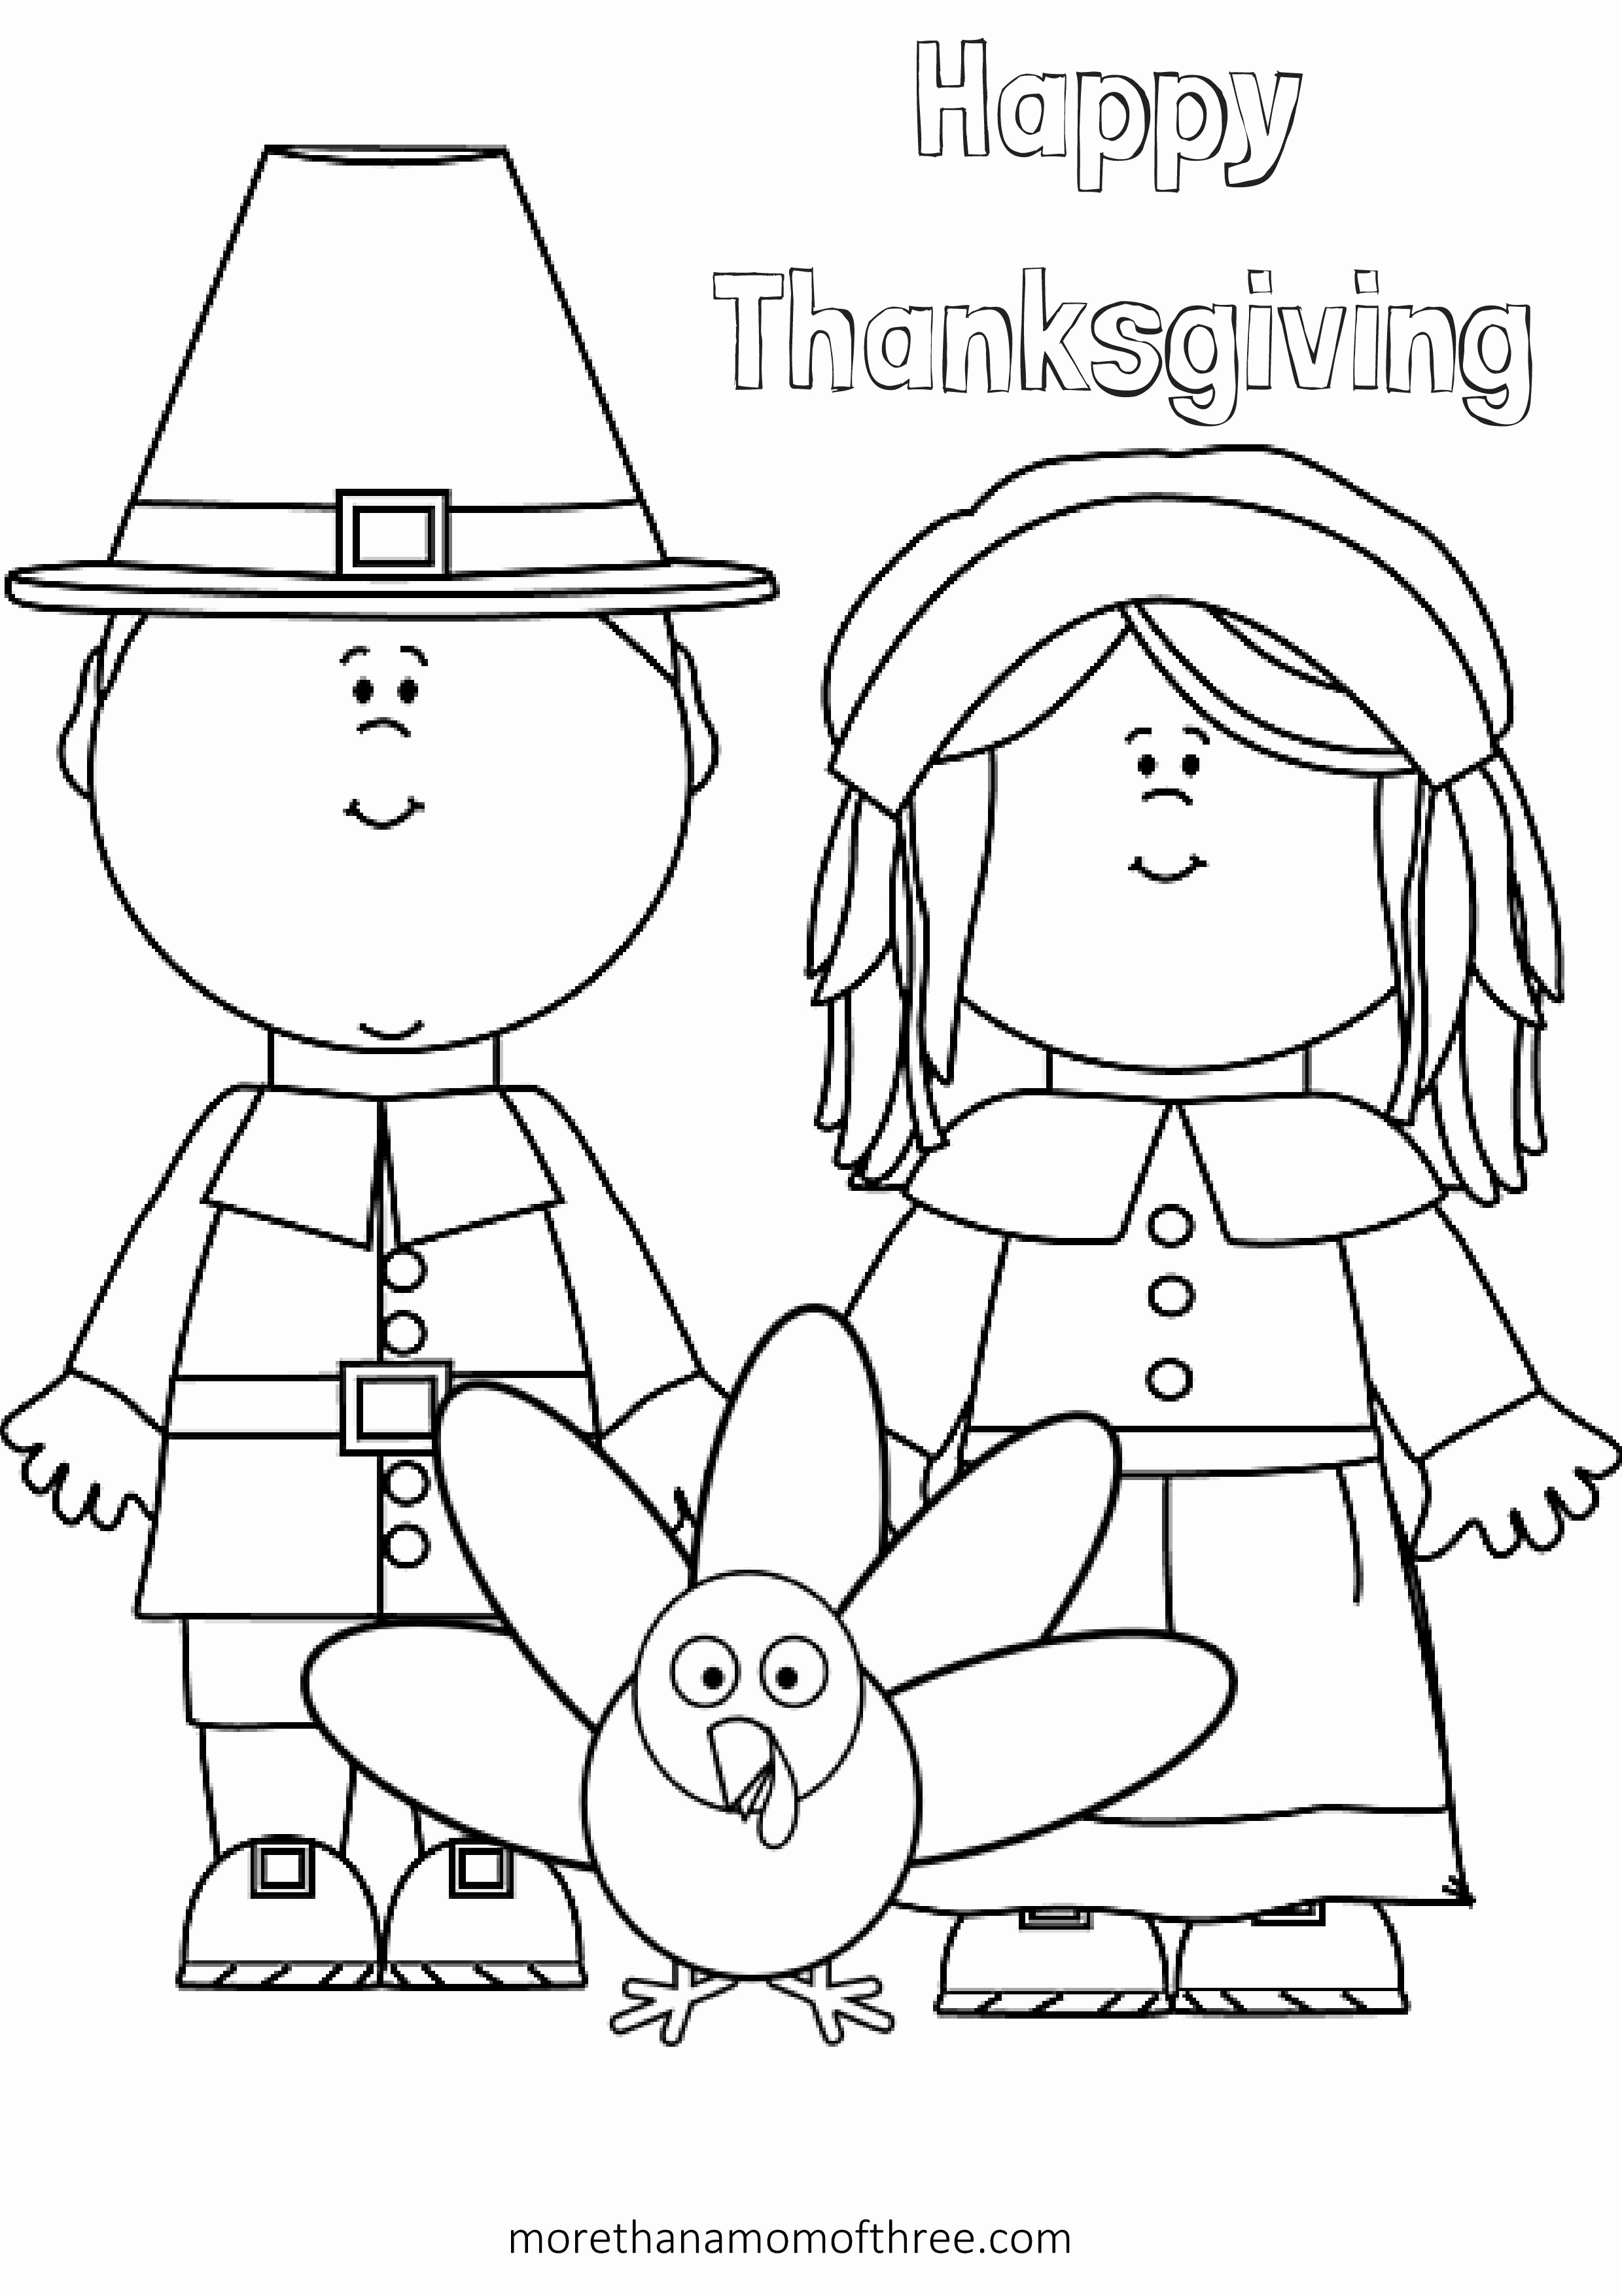 Preschool Turkey Coloring Pages Coloring Pages Turkey Coloringges Printable Image Inspirations